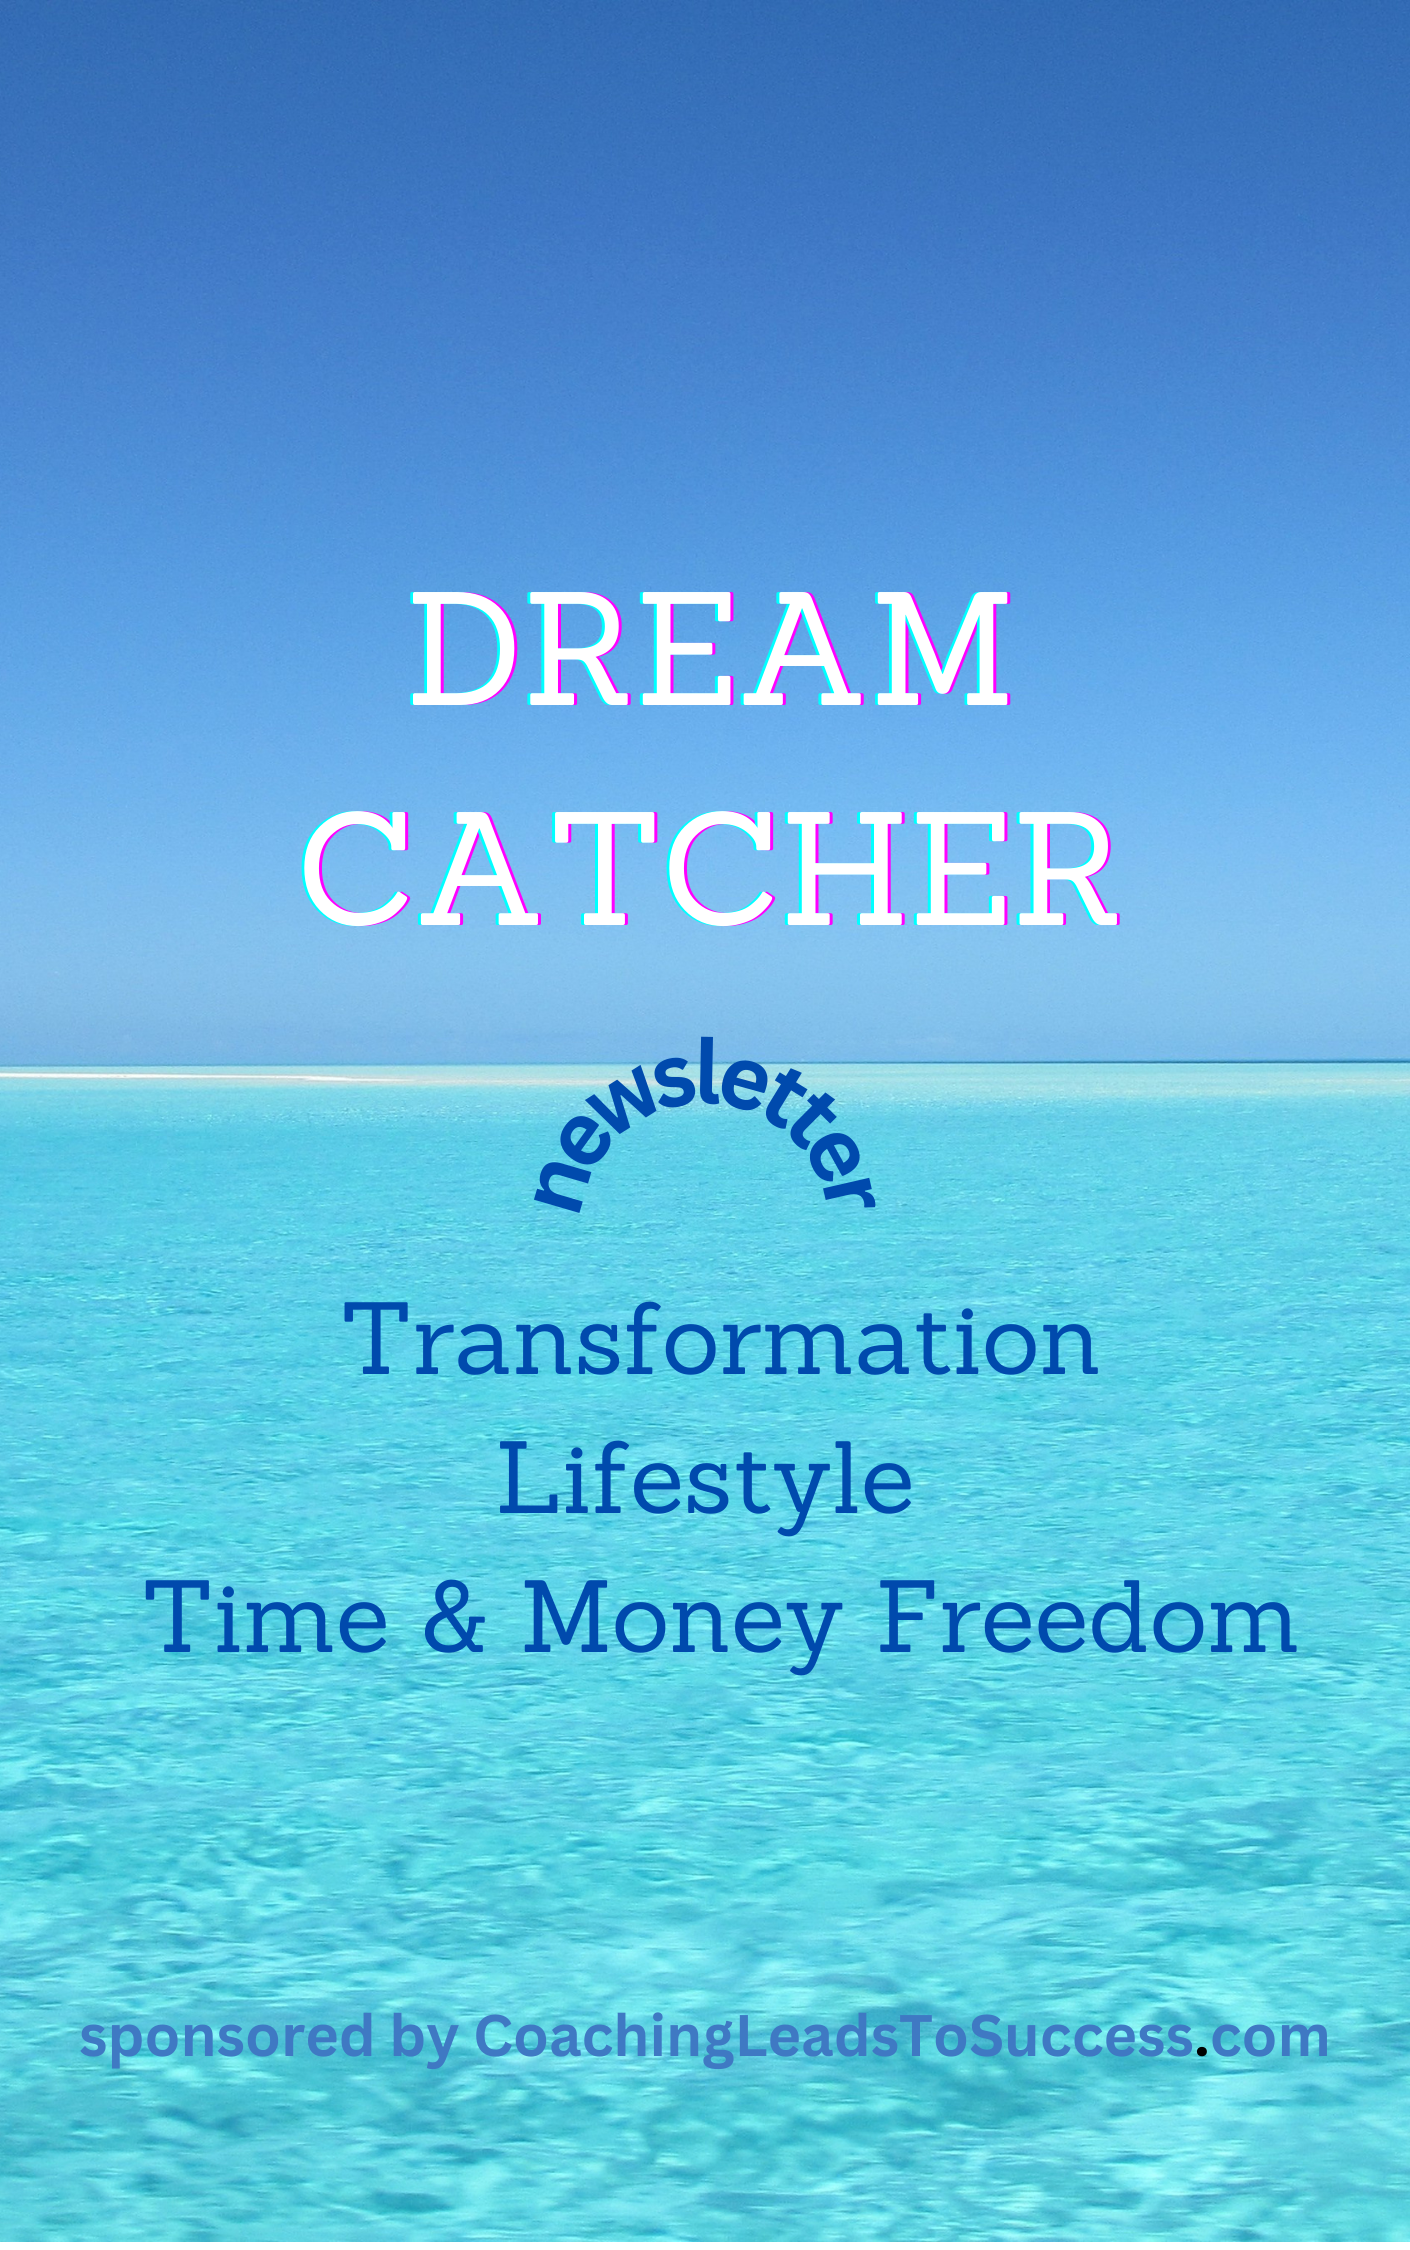 Dream Catcher newsletter for transformation tip, tools and techniques to living life by design with PaTrisha-Anne Todd at CoachingleadsToSuccess.com